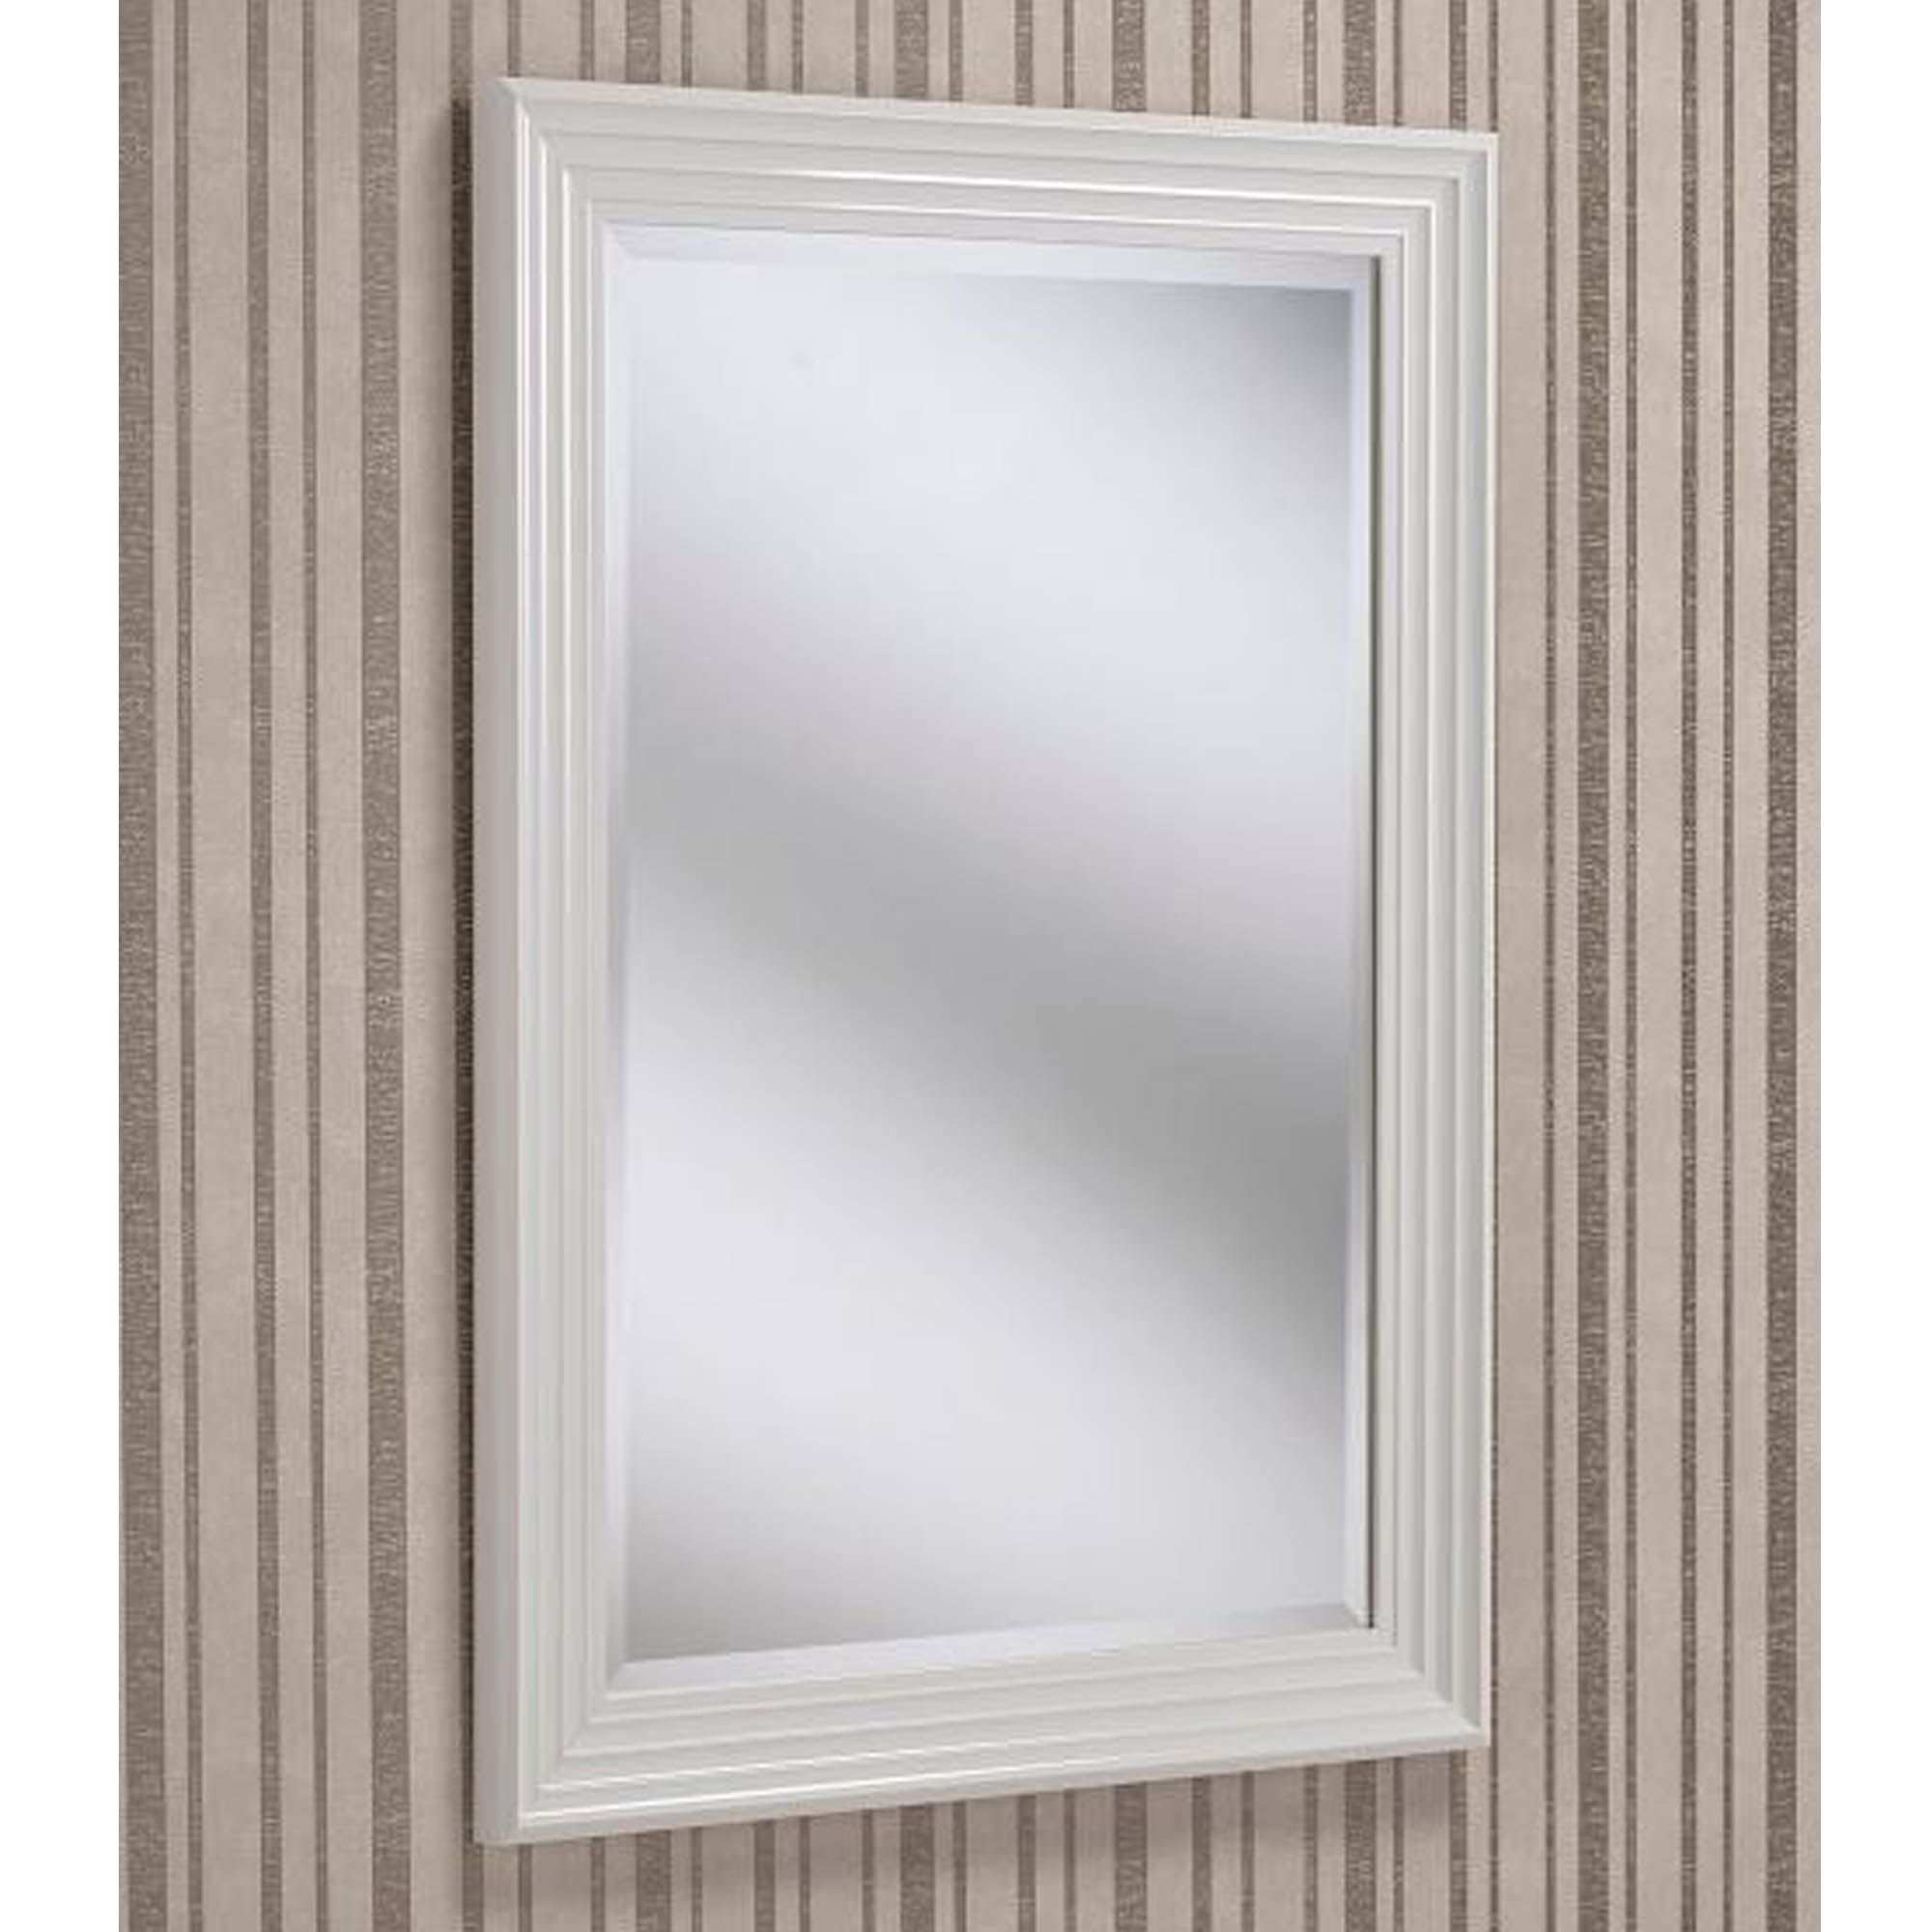 Rectangular White Beveled Contemporary Wall Mirror | Wall Mirror In Rectangle Pewter Beveled Wall Mirrors (View 3 of 15)